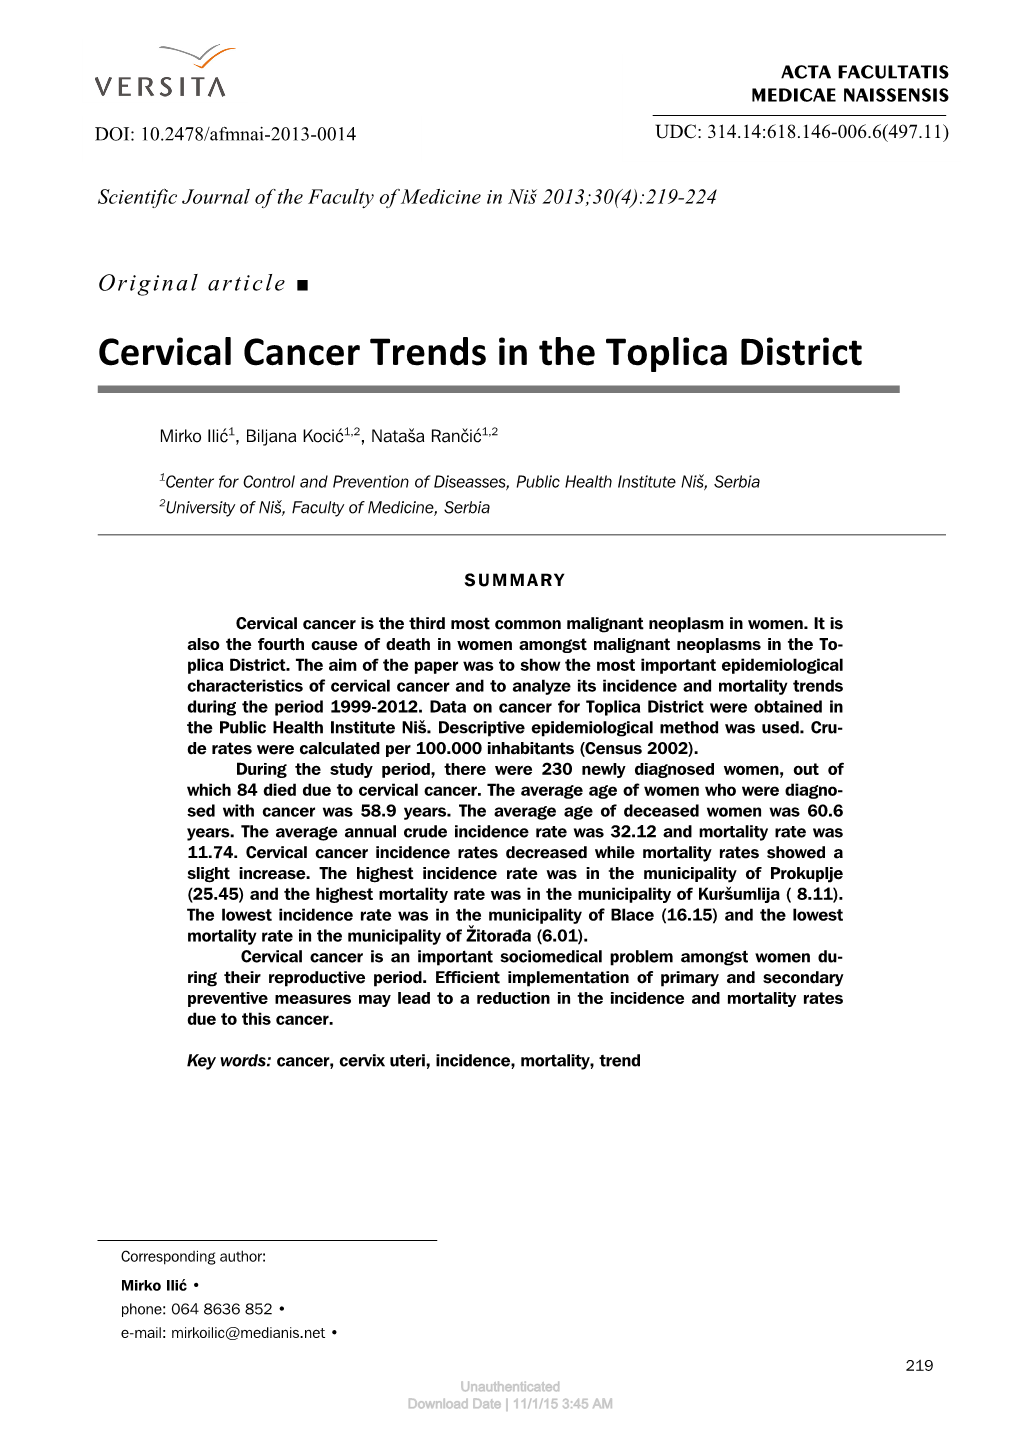 Cervical Cancer Trends in the Toplica District